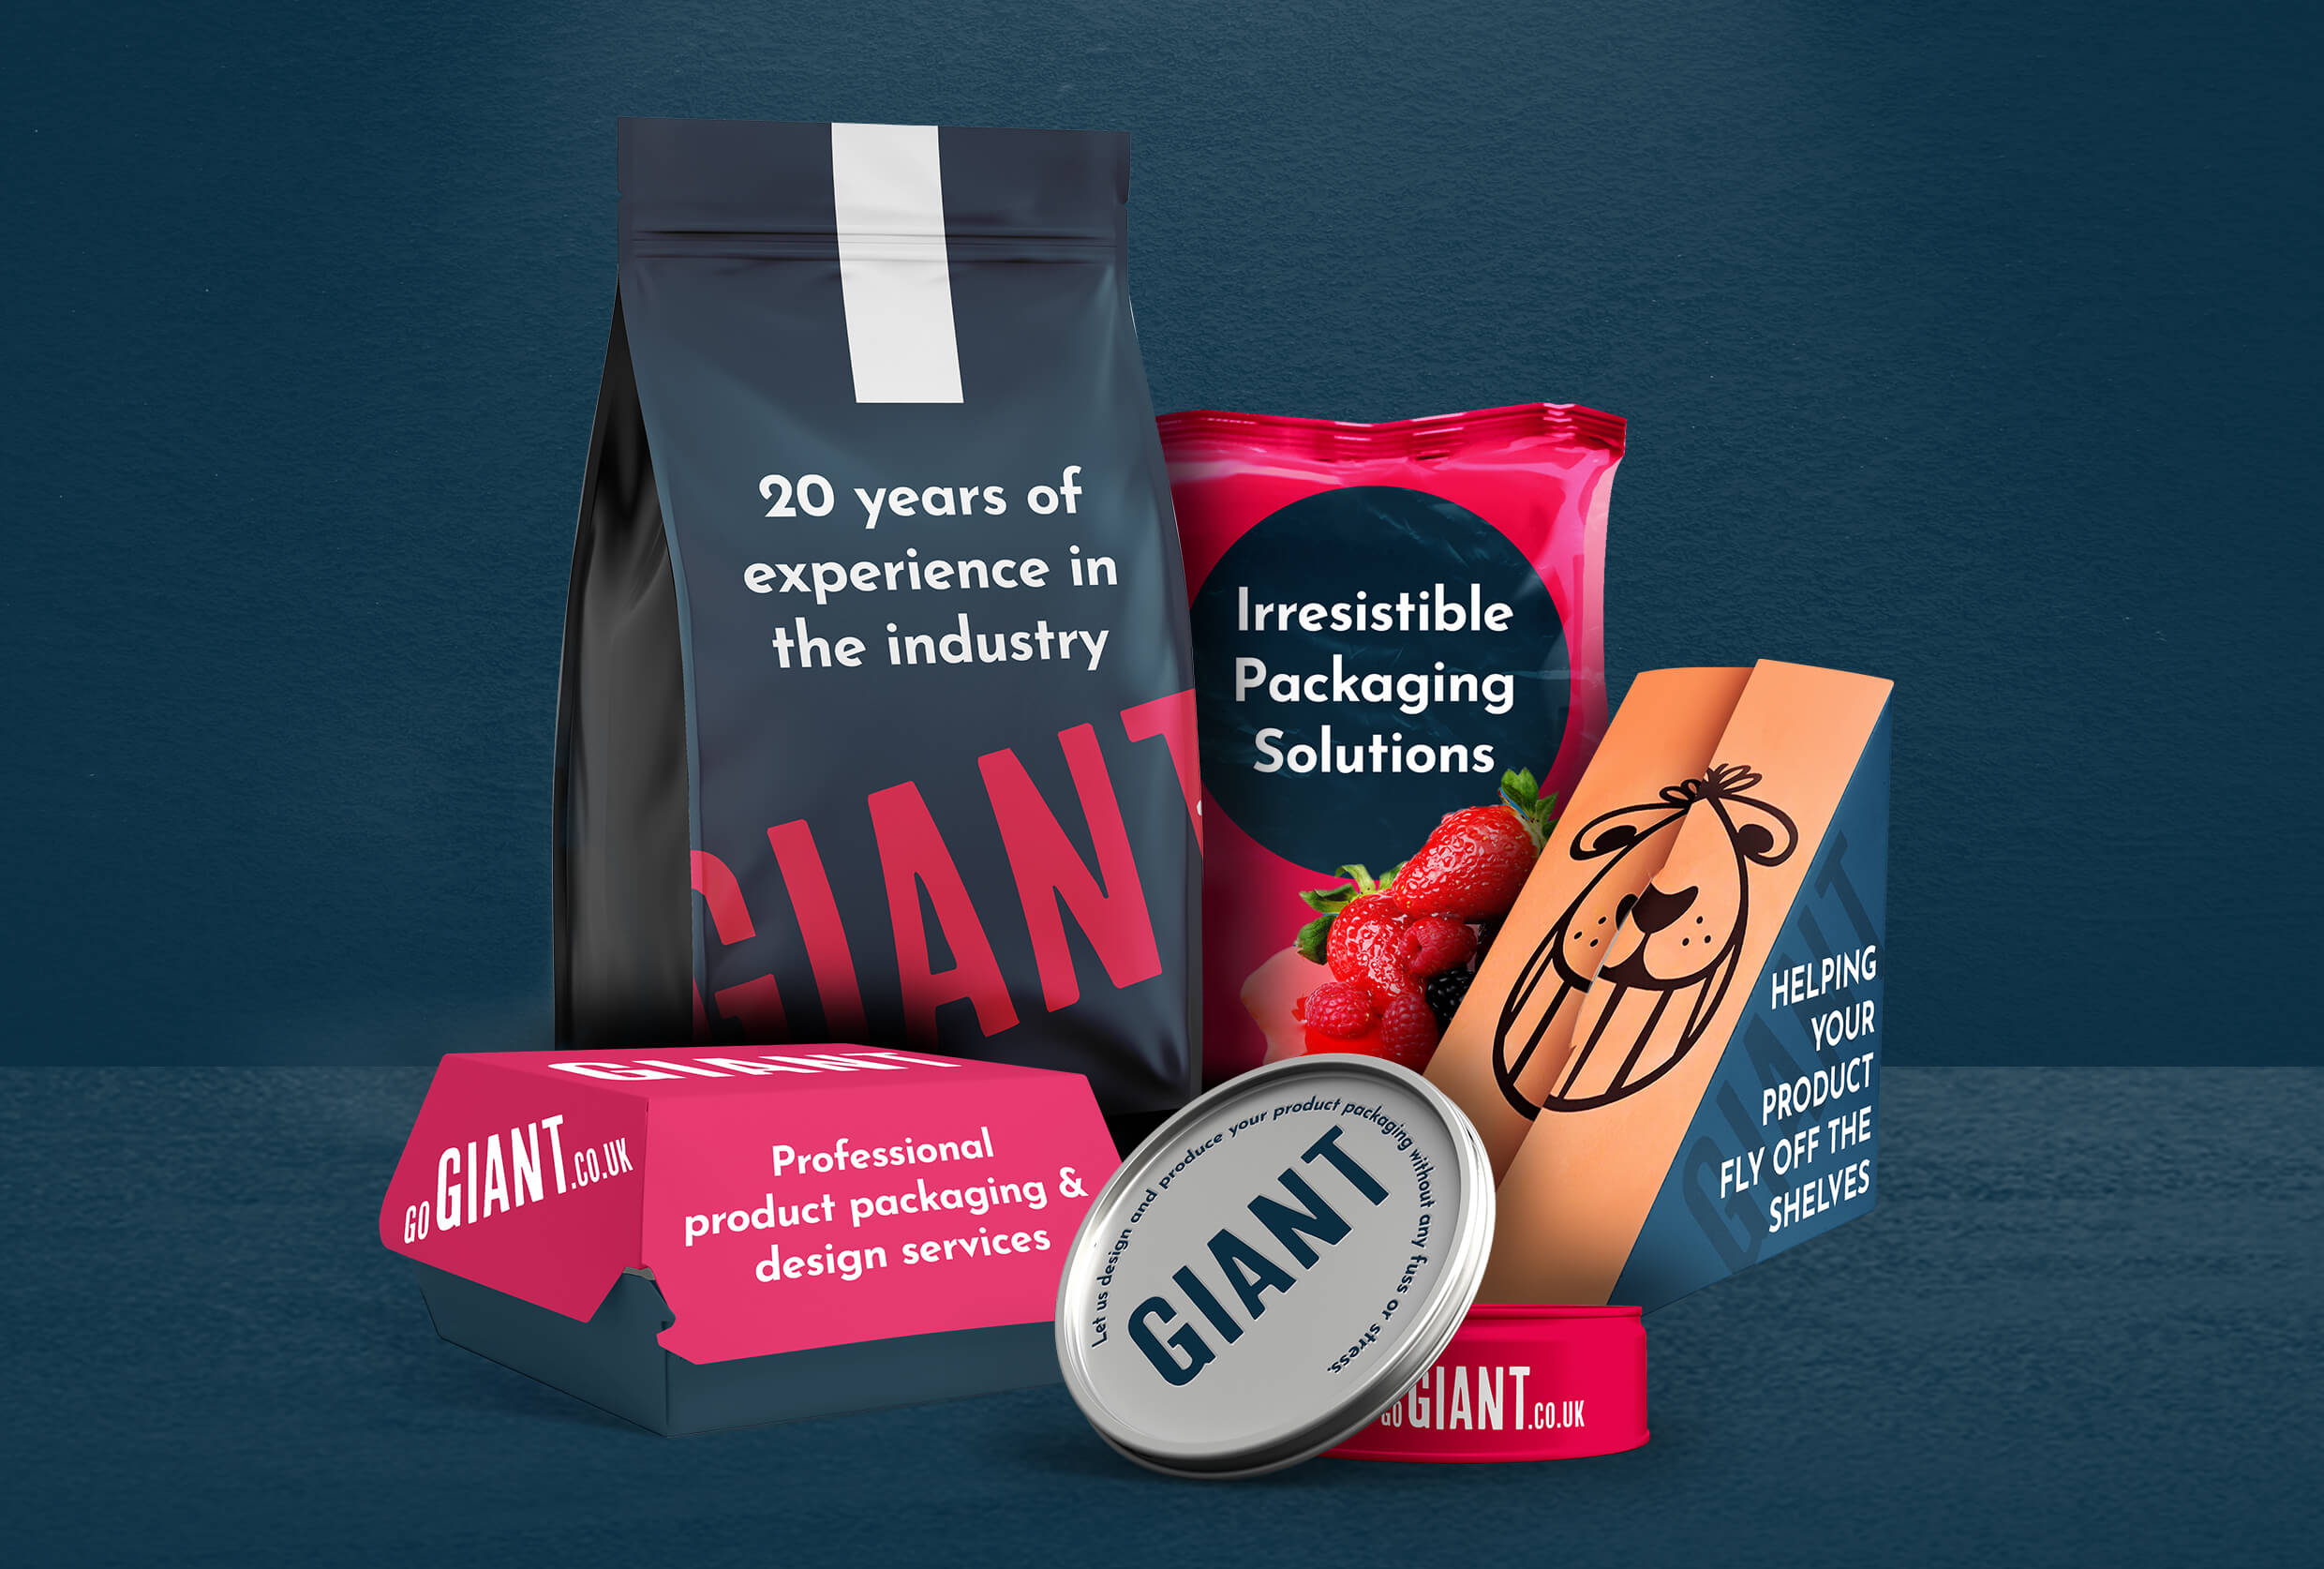 GIANT Packaging Team – Heroes in a Clamshell